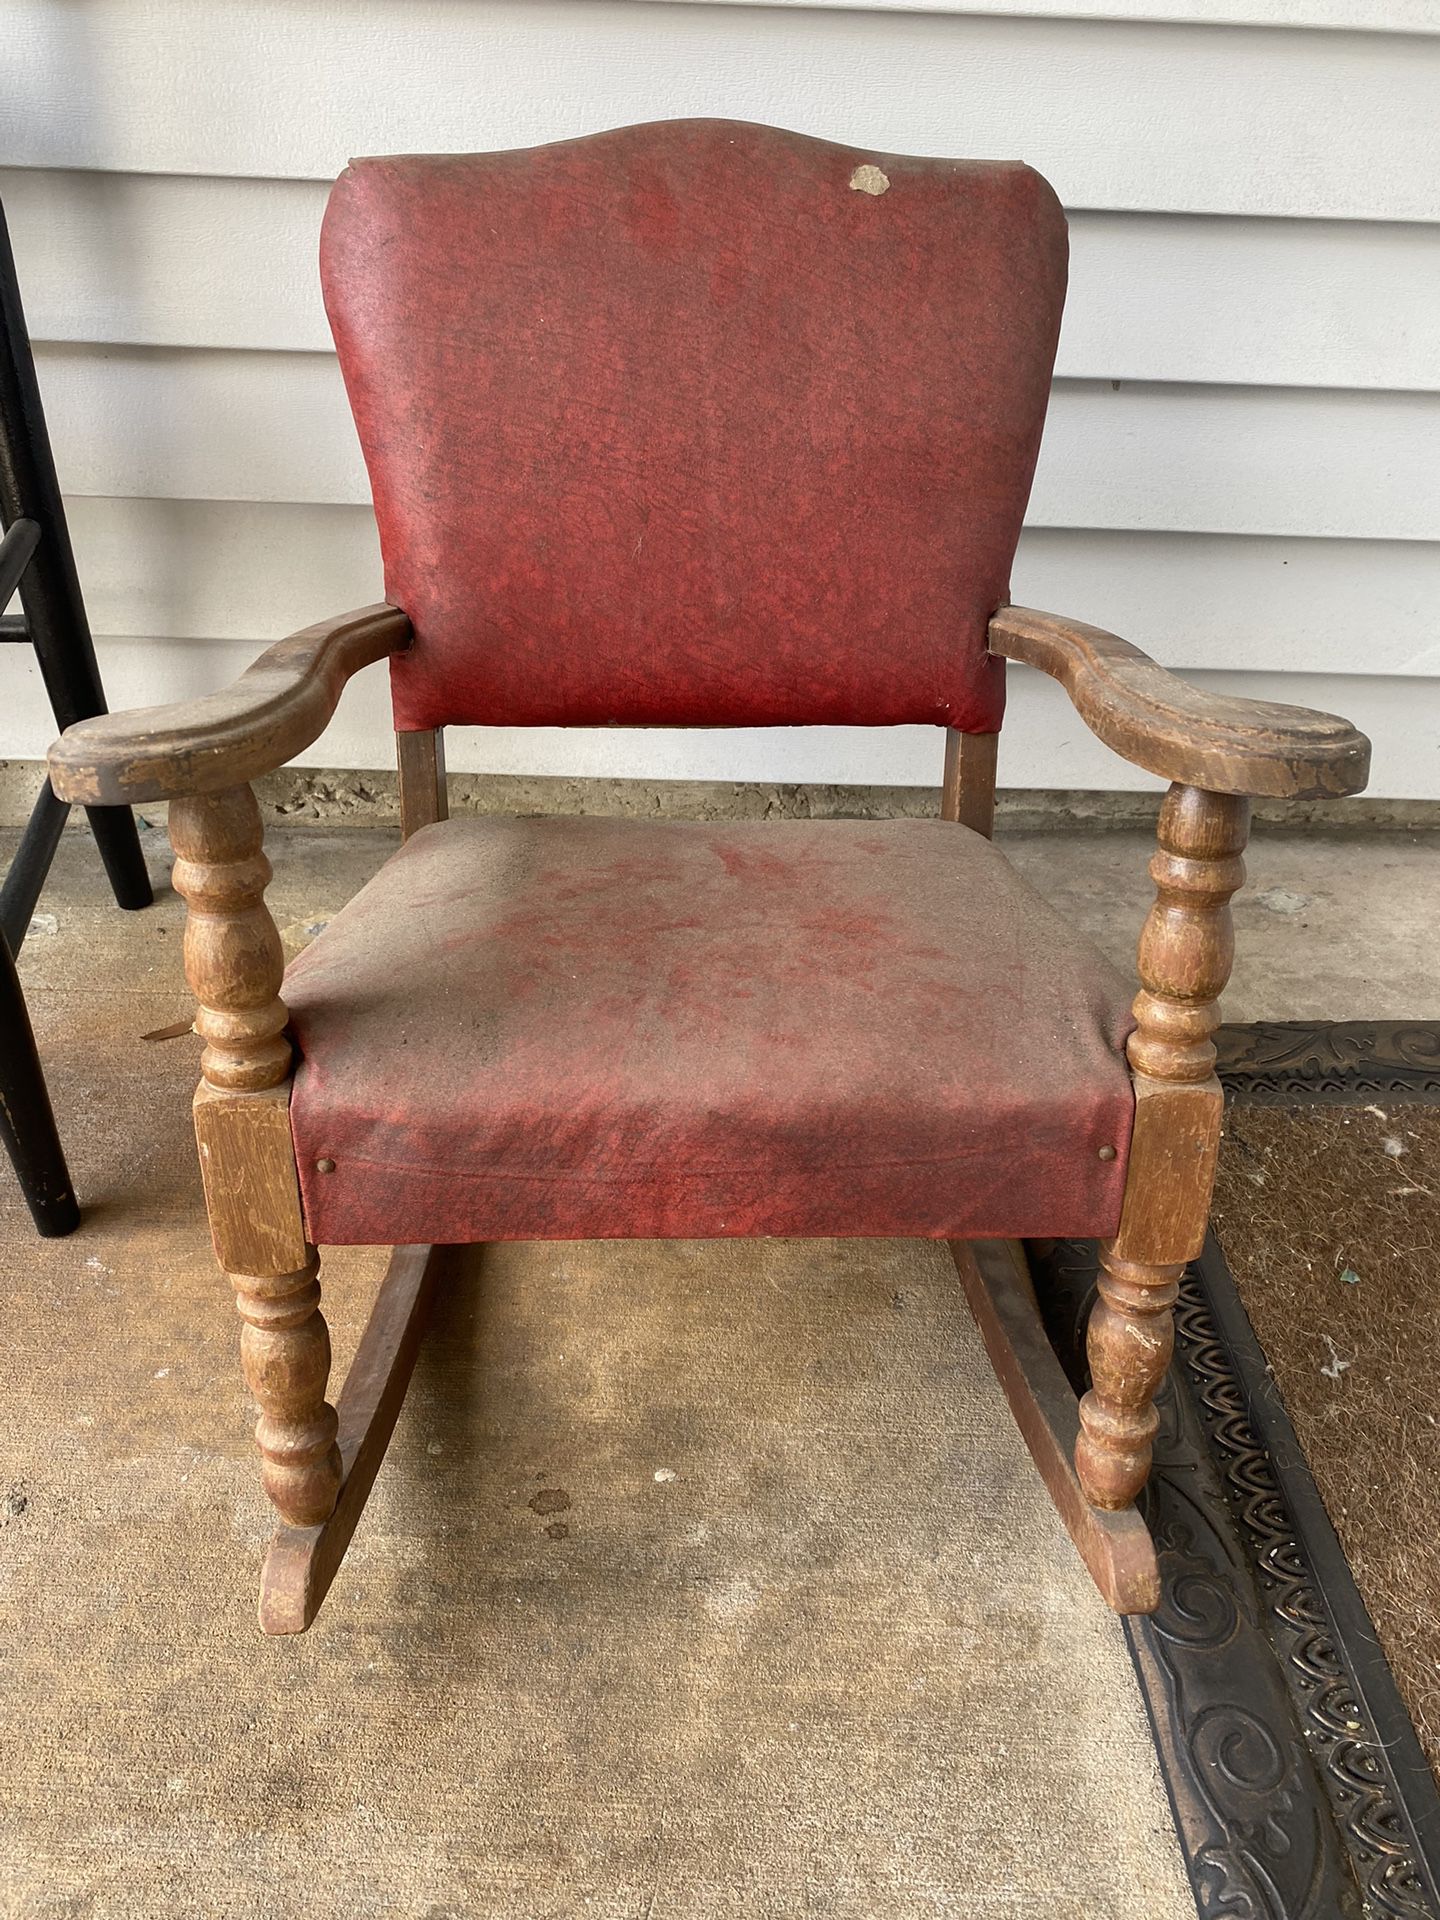 1(contact info removed) Child’s Rocking Chair